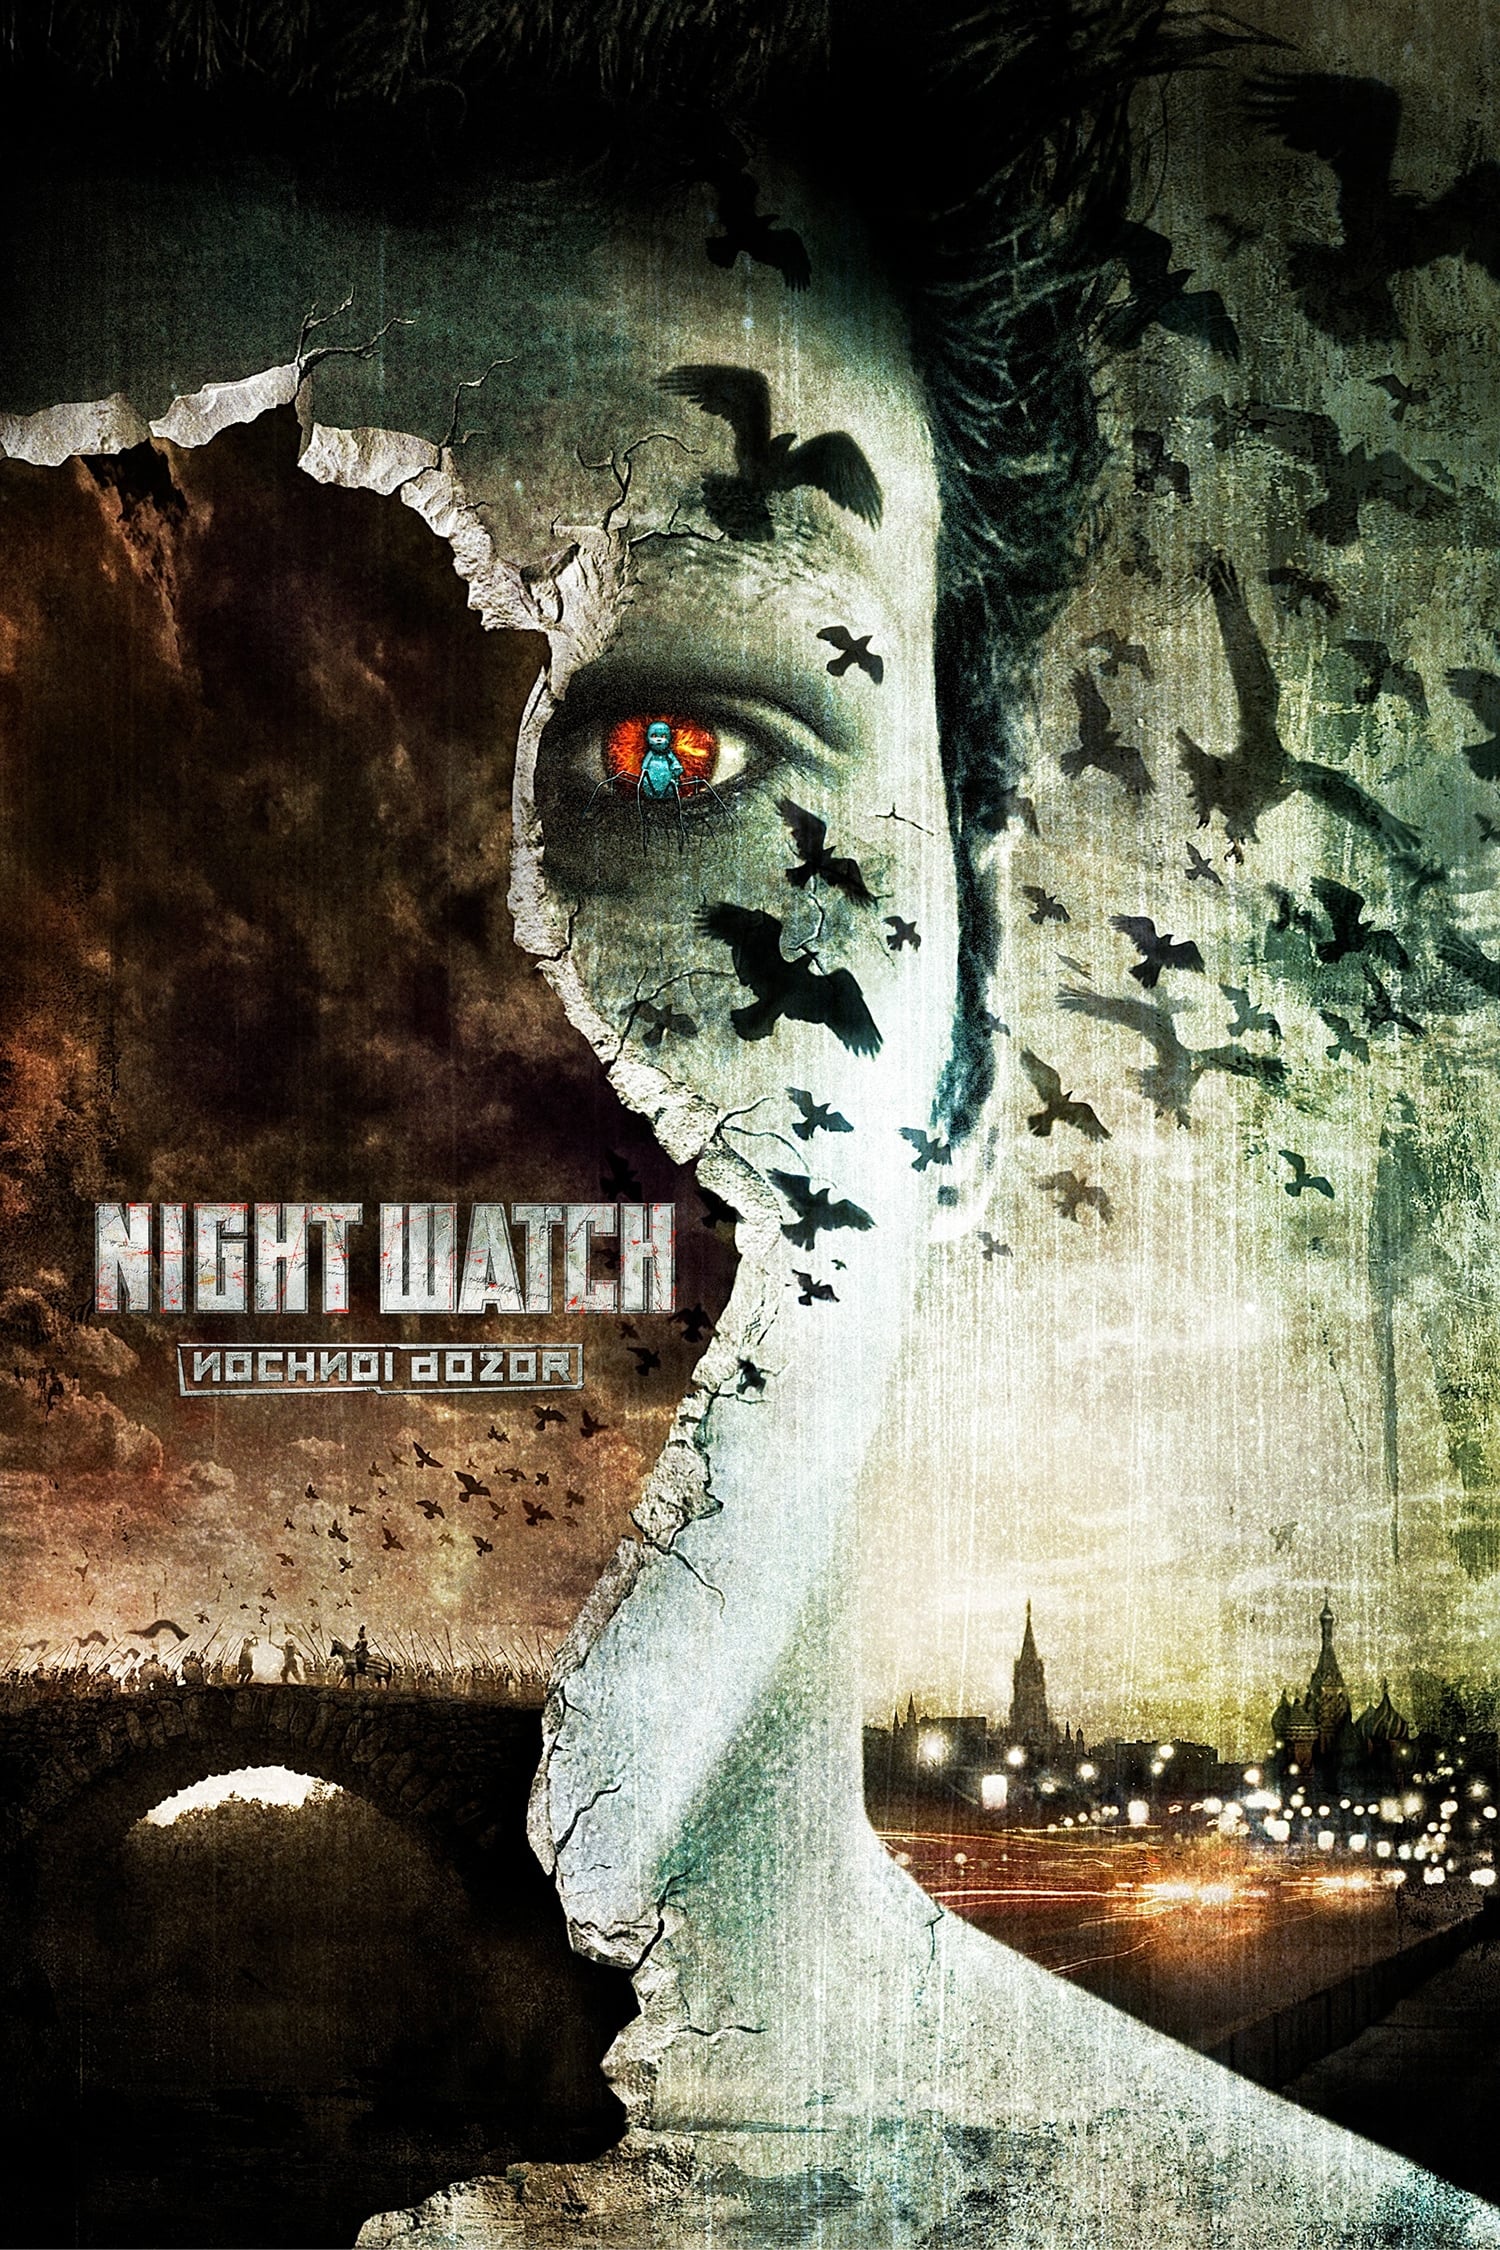 Poster for the movie Night Watch, released in 2004